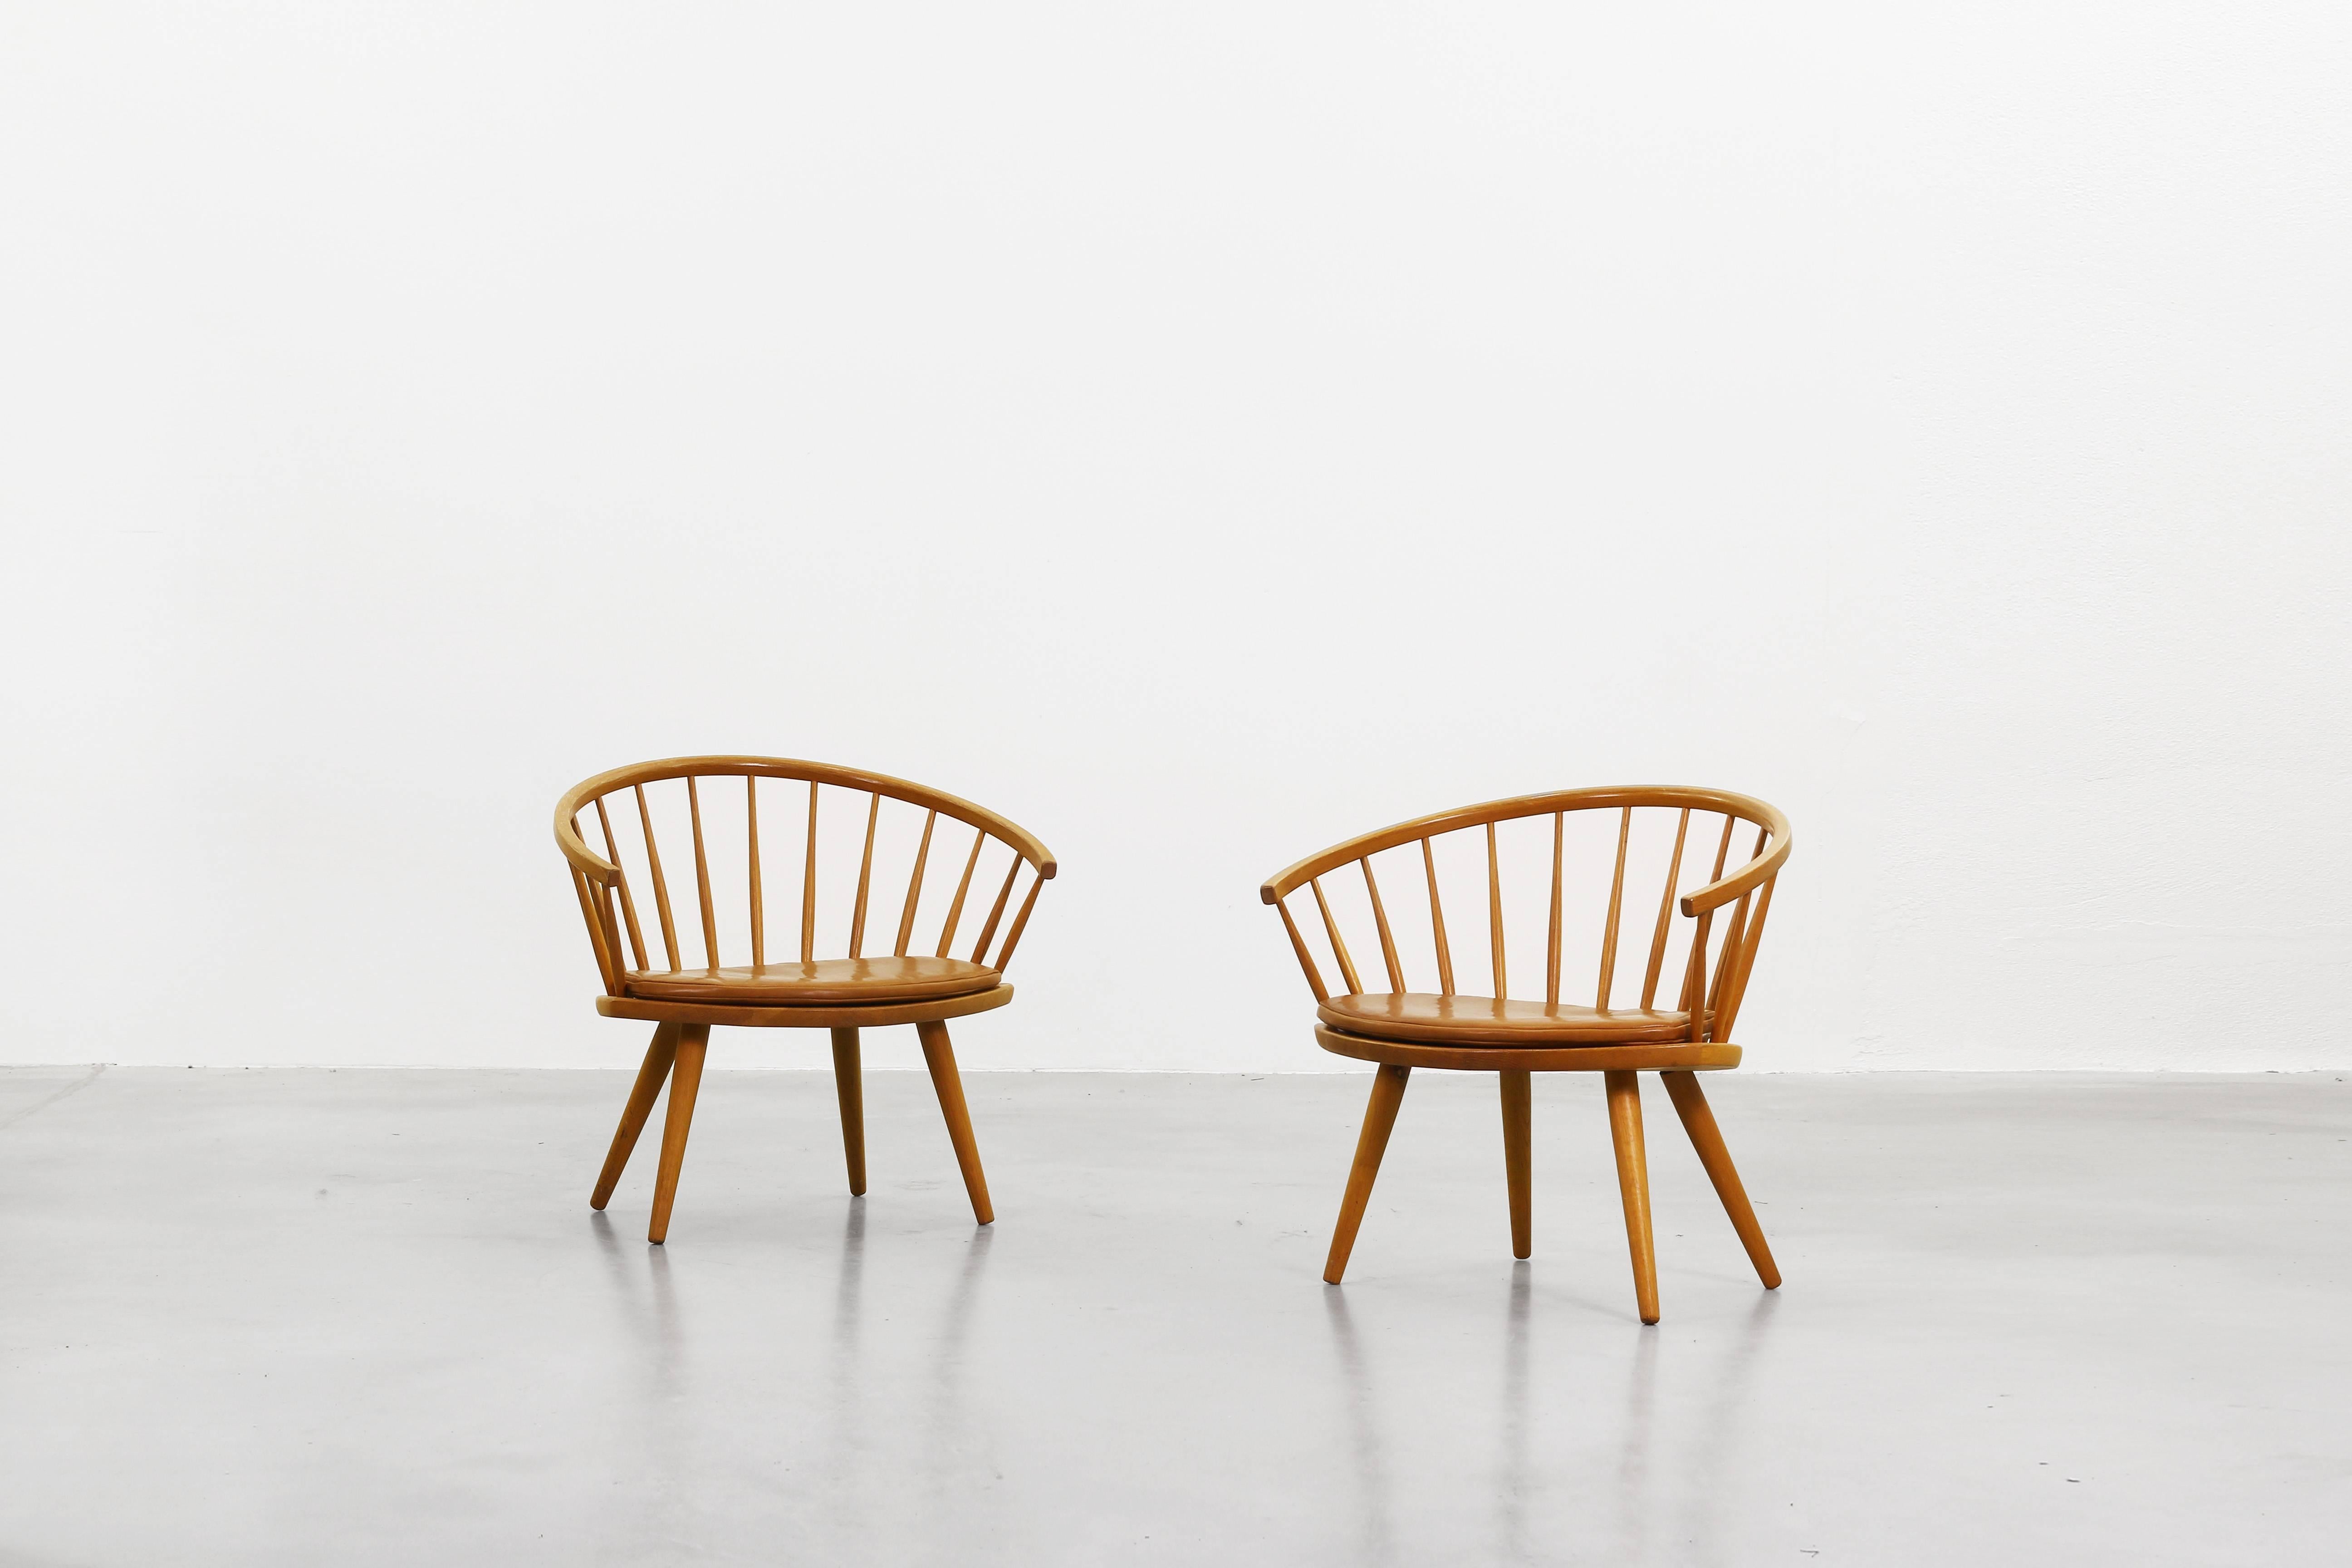 A very beautiful pair of lounge chairs designed by Yngve Ekström for Stolab, manufactured in the 1950s in Sweden. Both chairs are made of oak and are in a very good condition with little signs of use.